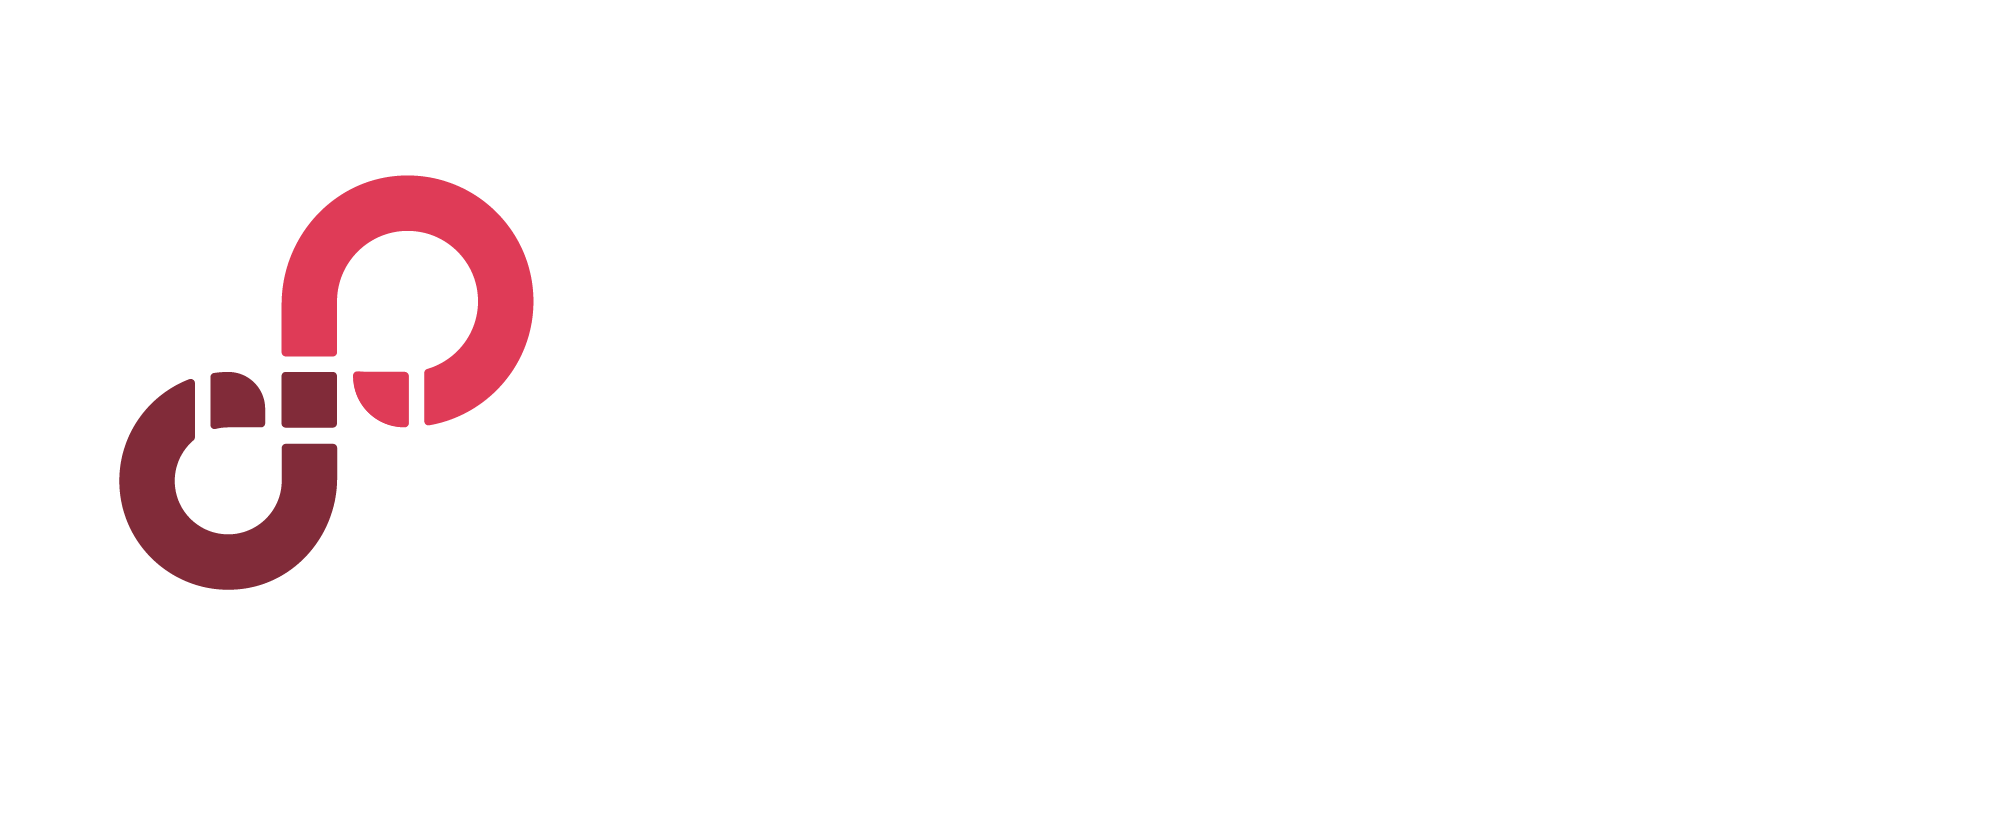 <p>Scale your database to the edge globally for free with PolyScale.ai!</p>
